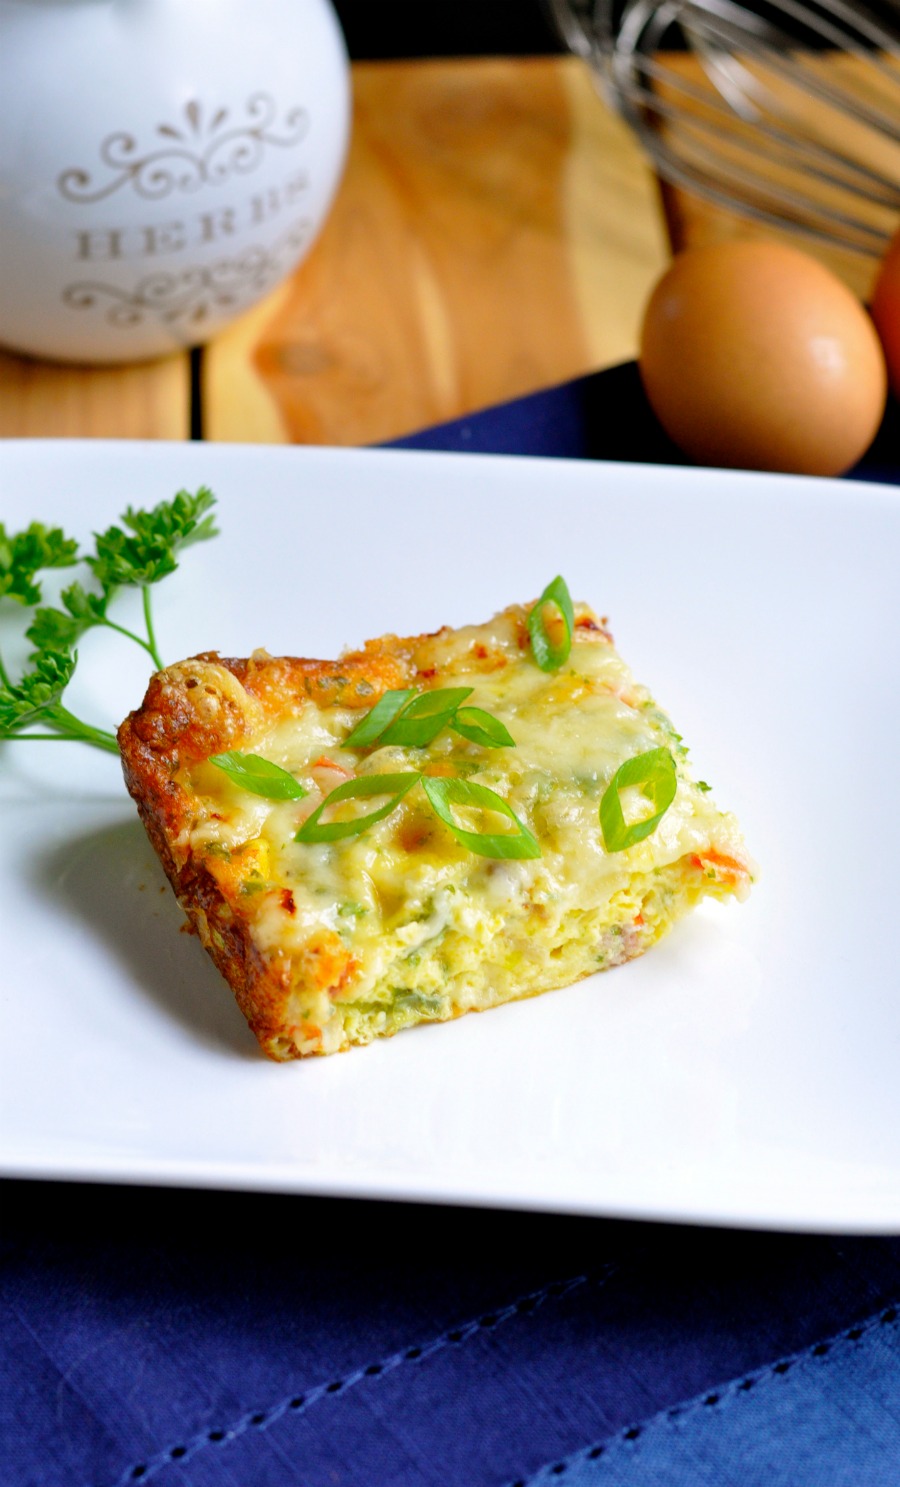 Cheese and Sausage Egg Bake by Real Food Girl: Unmodified